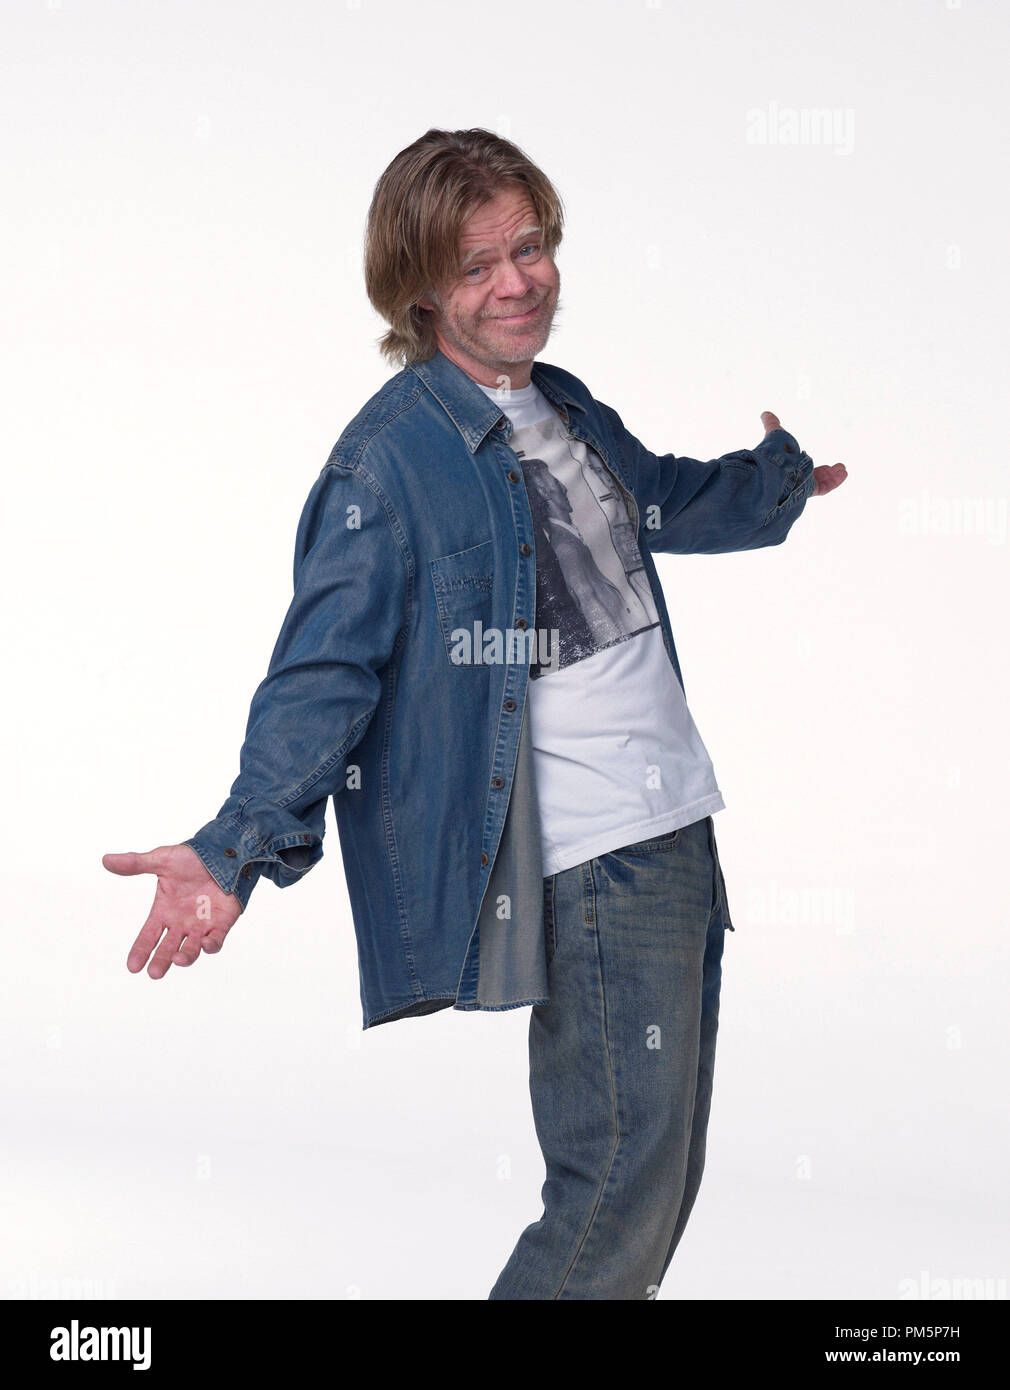 William H Macy As Frank Gallagher In Shameless Photo Courtesy Of